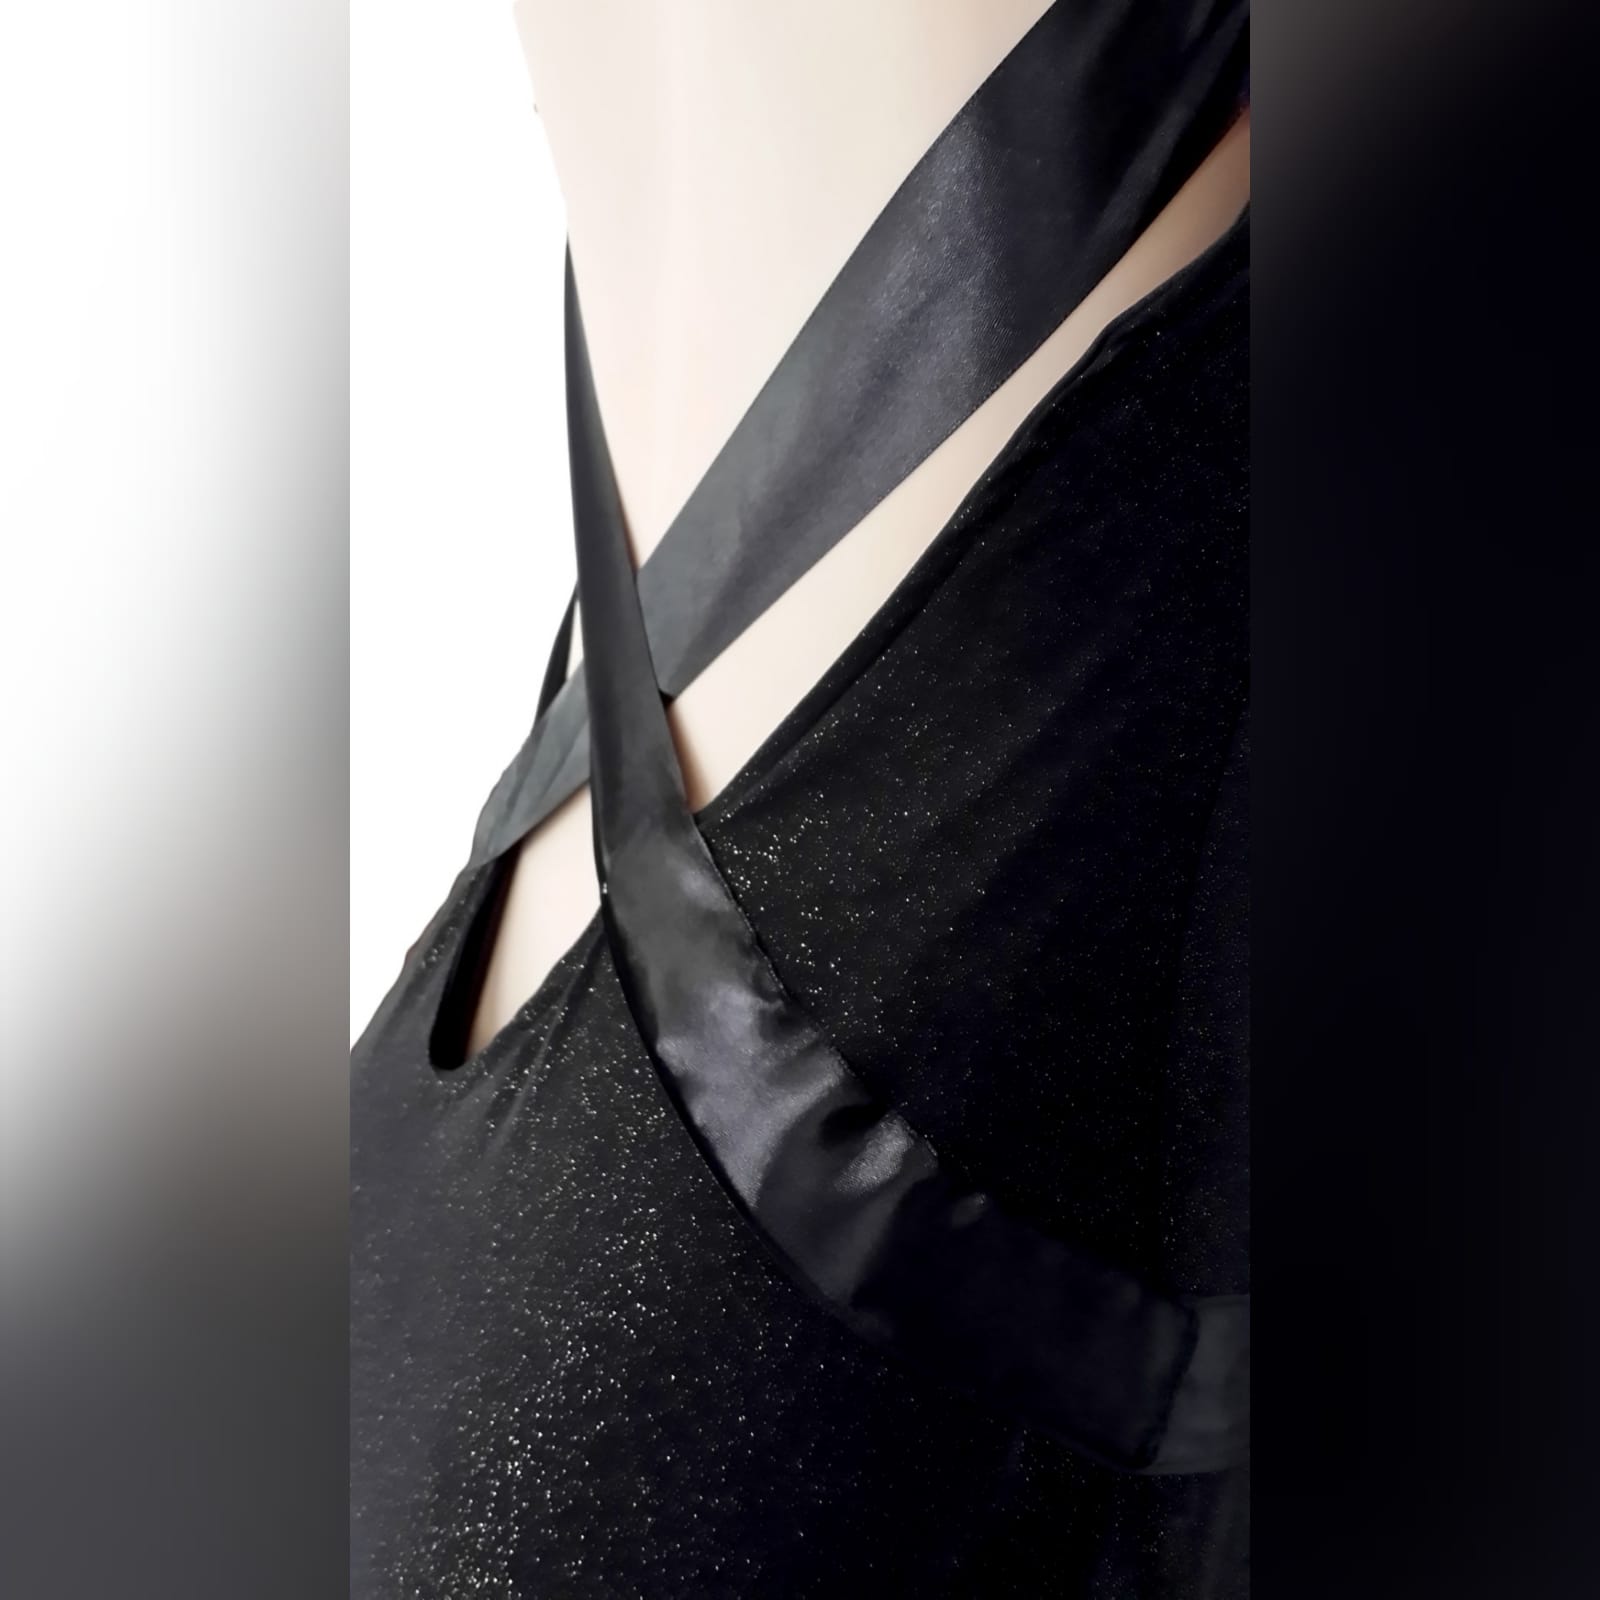 Black shimmer long gala evening dress 4 black shimmer long gala evening dress, with a low v open back. With ribbon creating a belt and a cross at the back